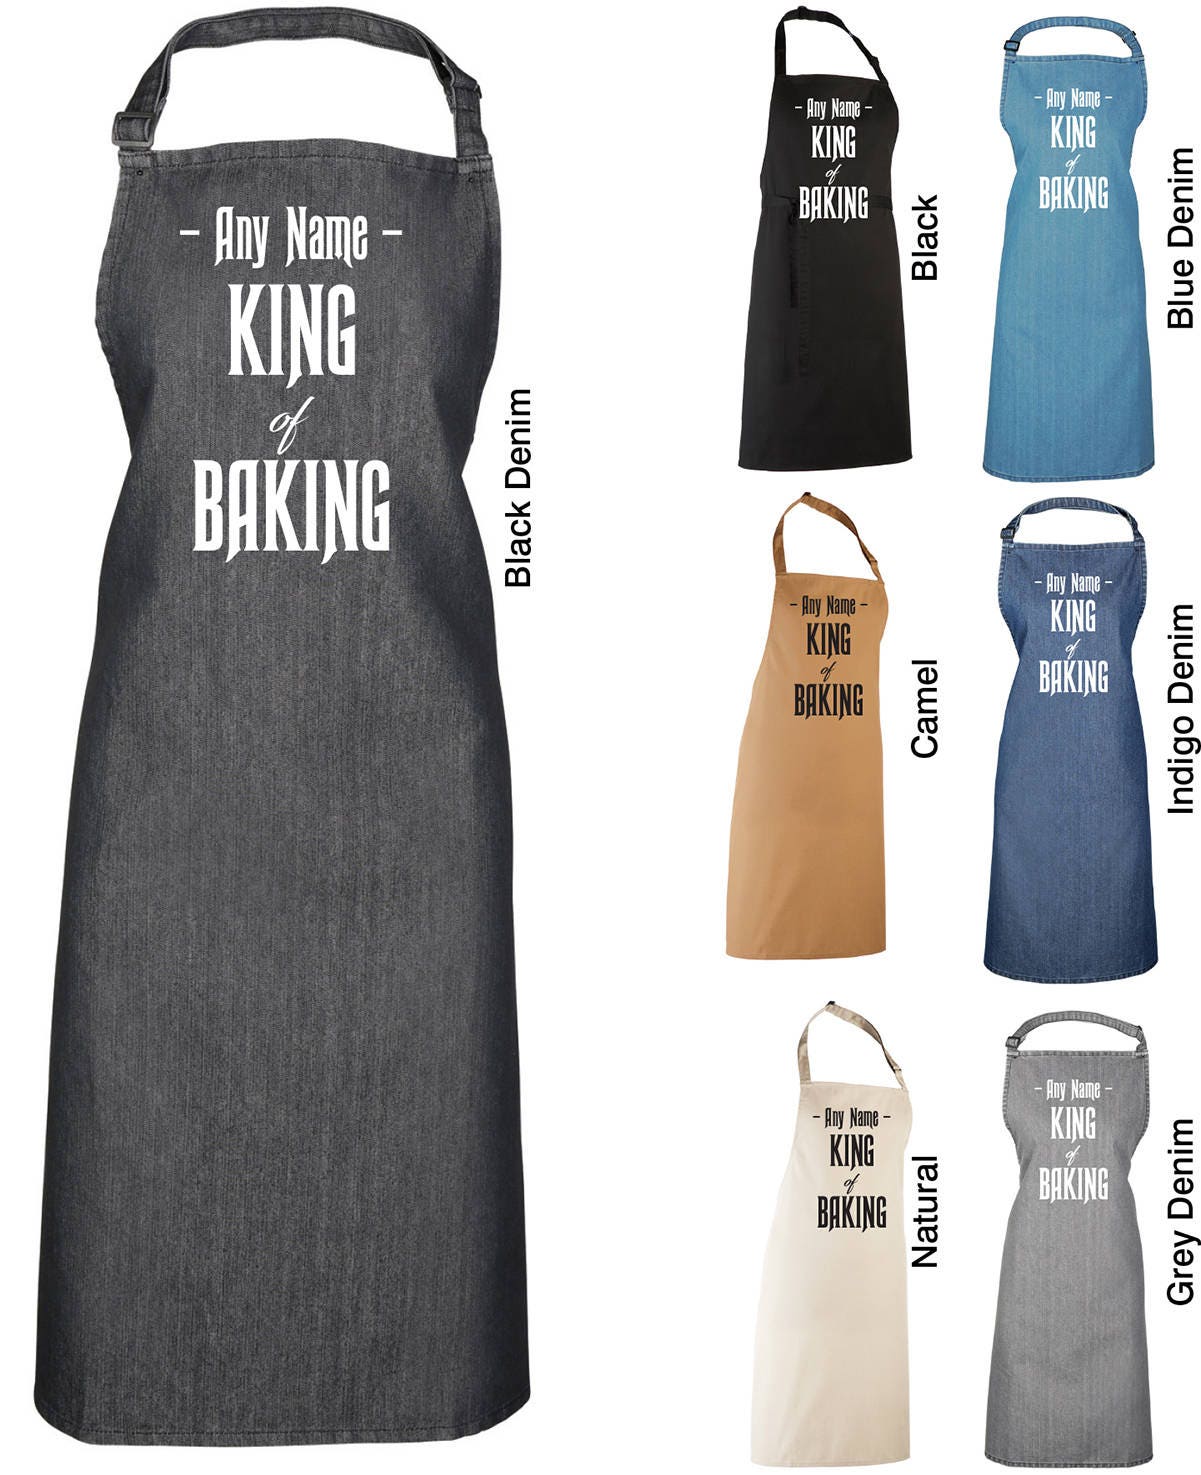 King of Baking Apron Personalised with Any Name, BBQ, Kitchen, Chef, Dad, Baker, Bake, Cakes